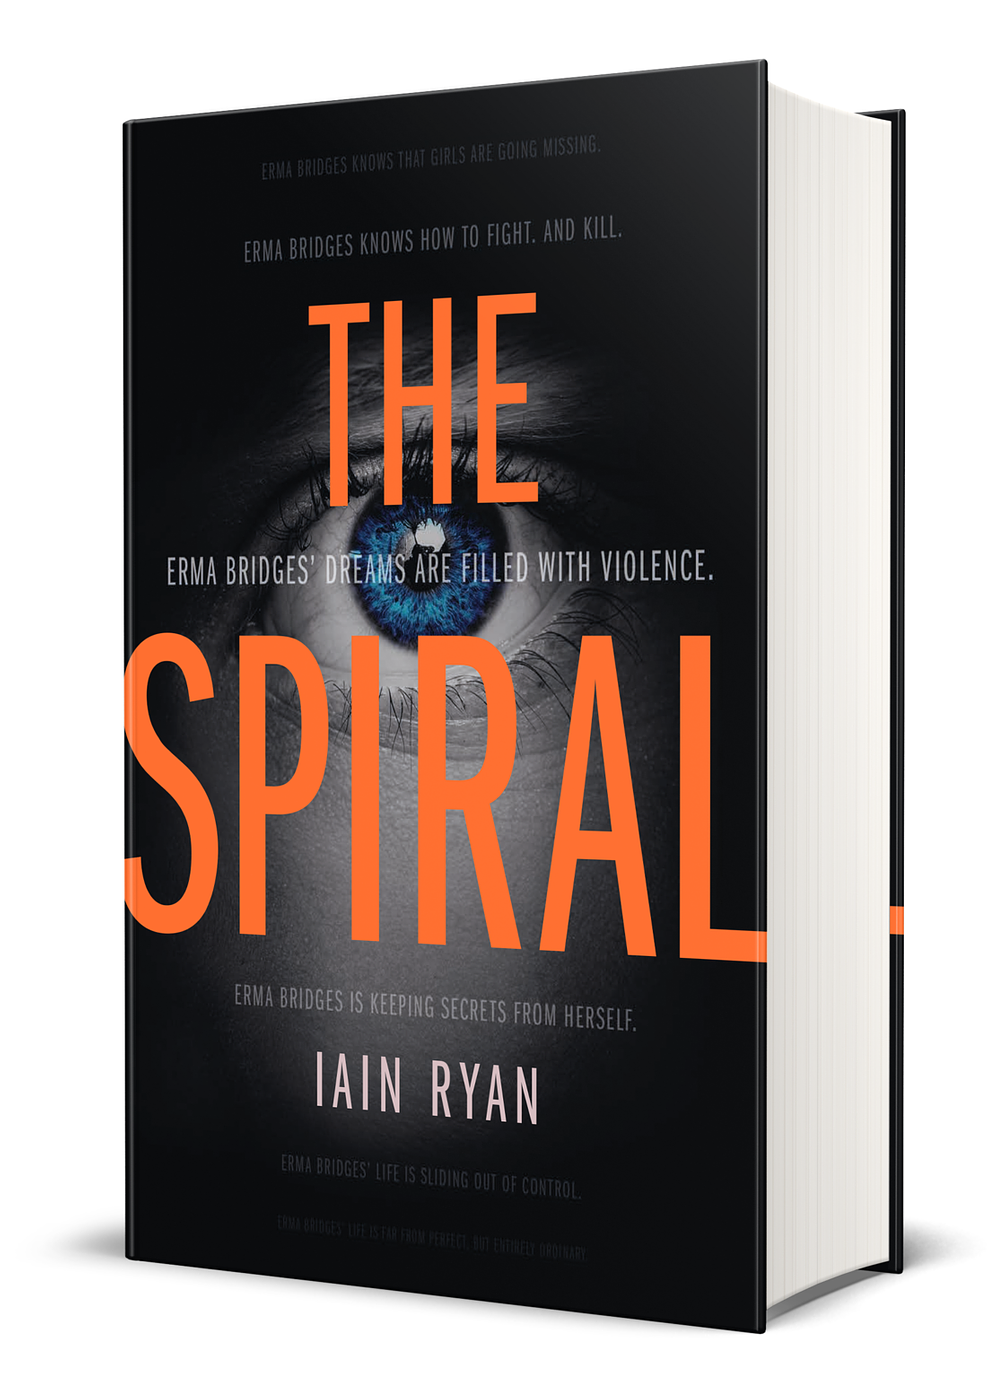 The Spiral (Paperback & Hardcover)